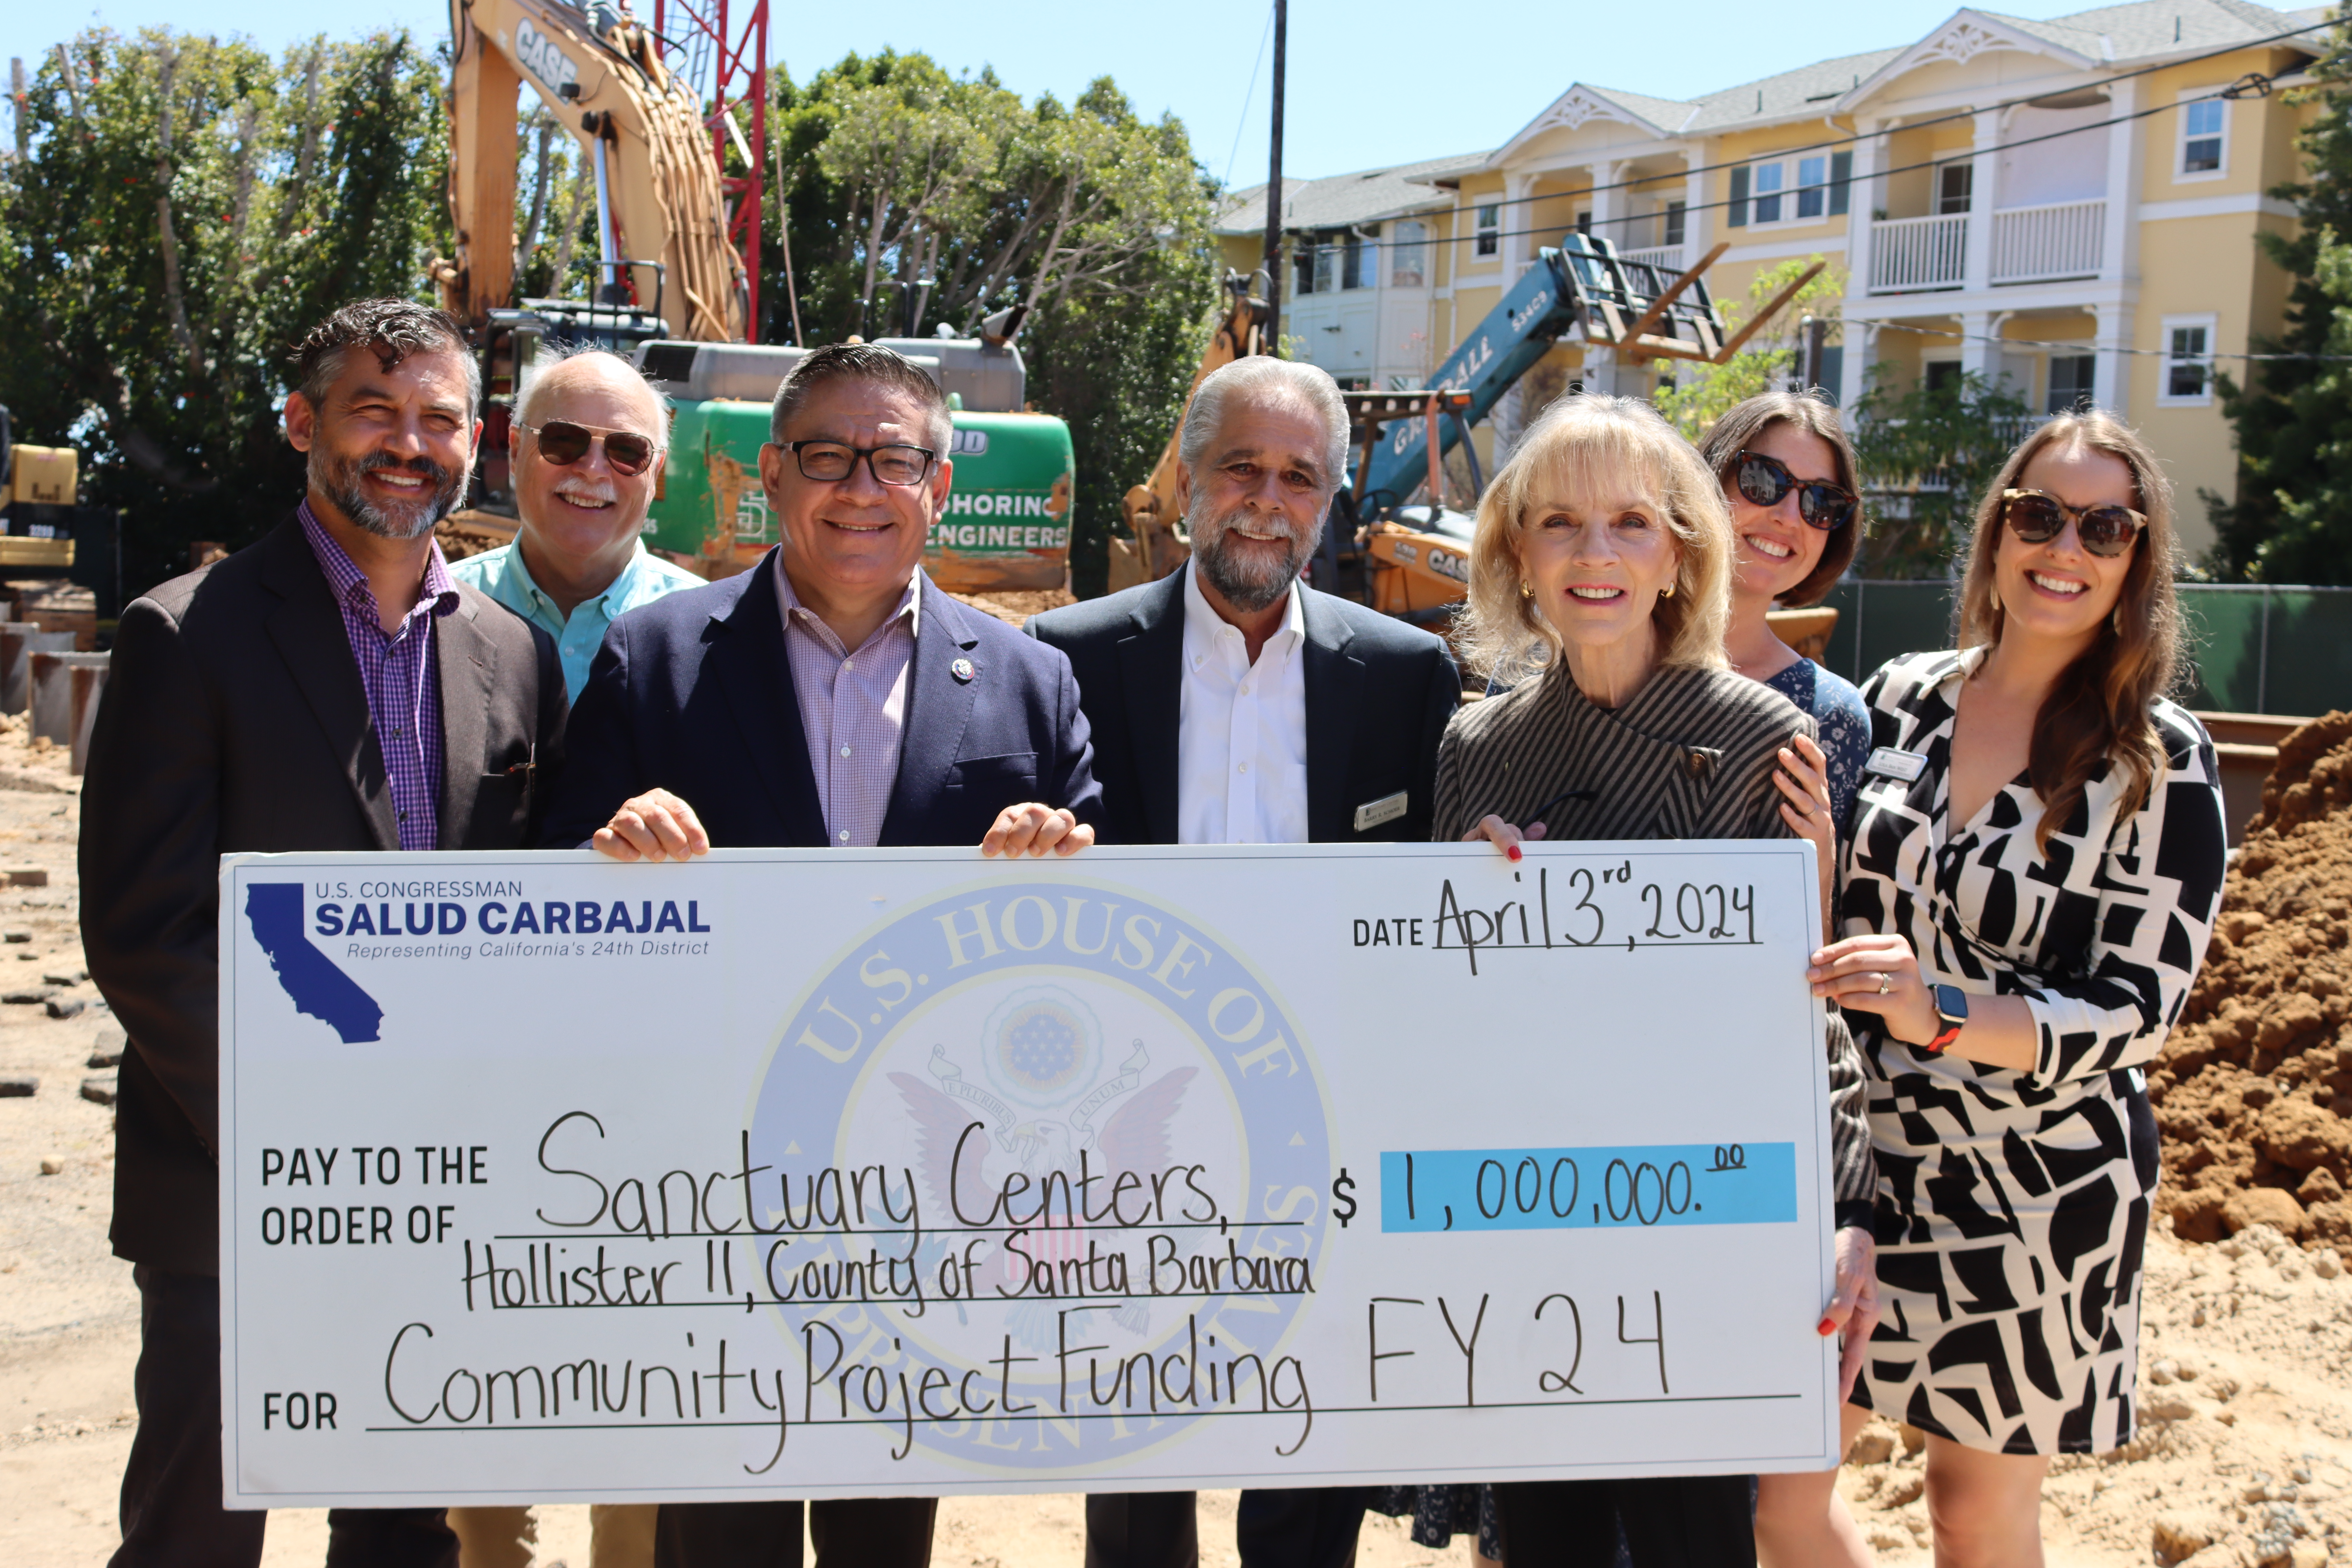 Rep. Carbajal Highlights Securing $1,000,000 Investment for New Housing Options, Health Clinic in Downtown Santa Barbara